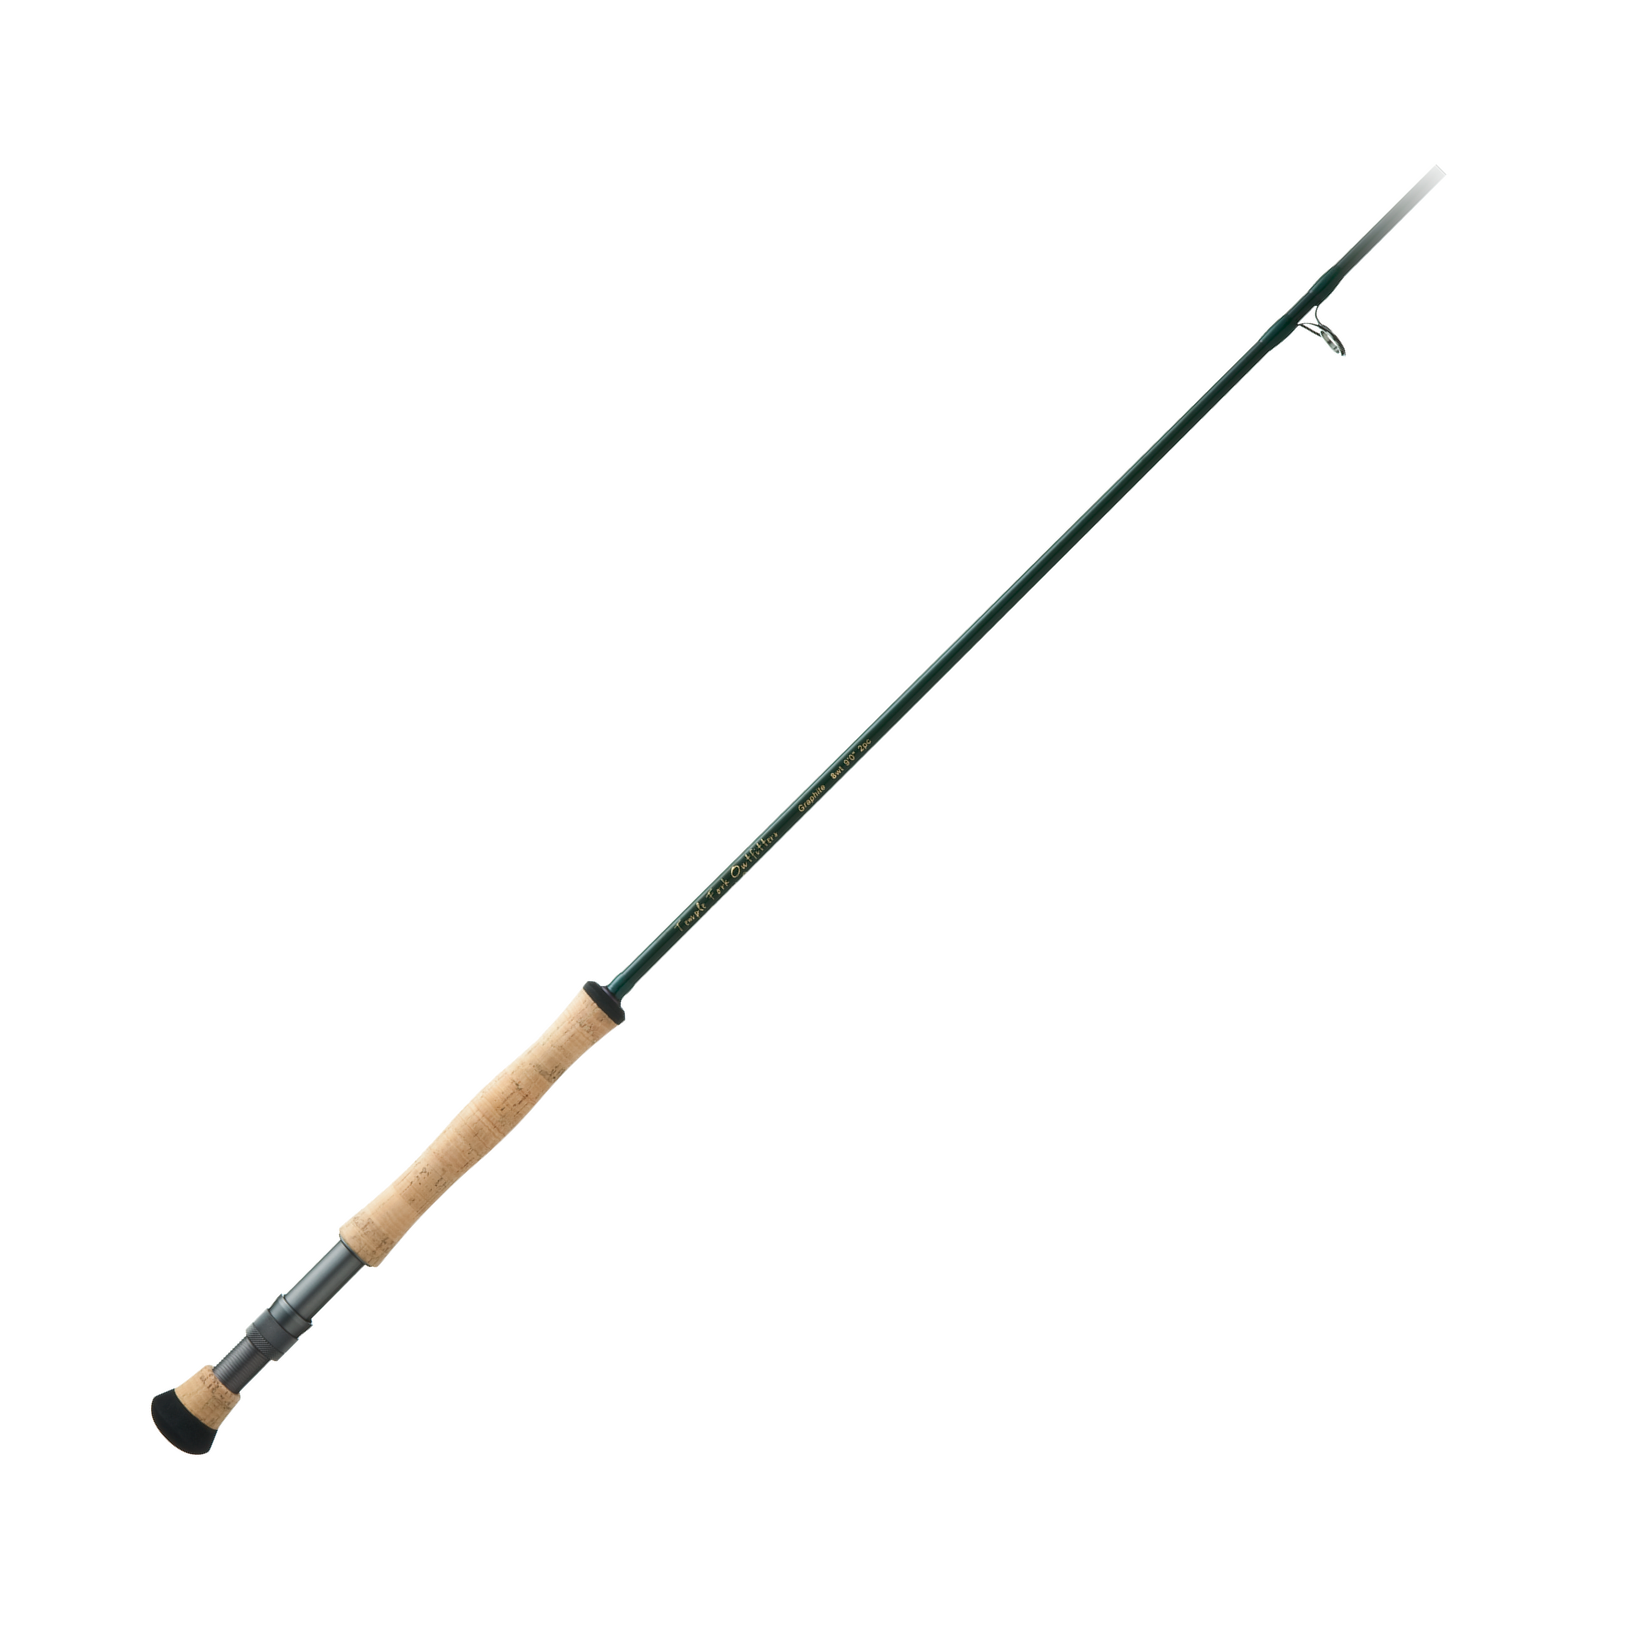 Temple Fork Outfitters Signature II Series Fly Rod - 9' - 5 wt.